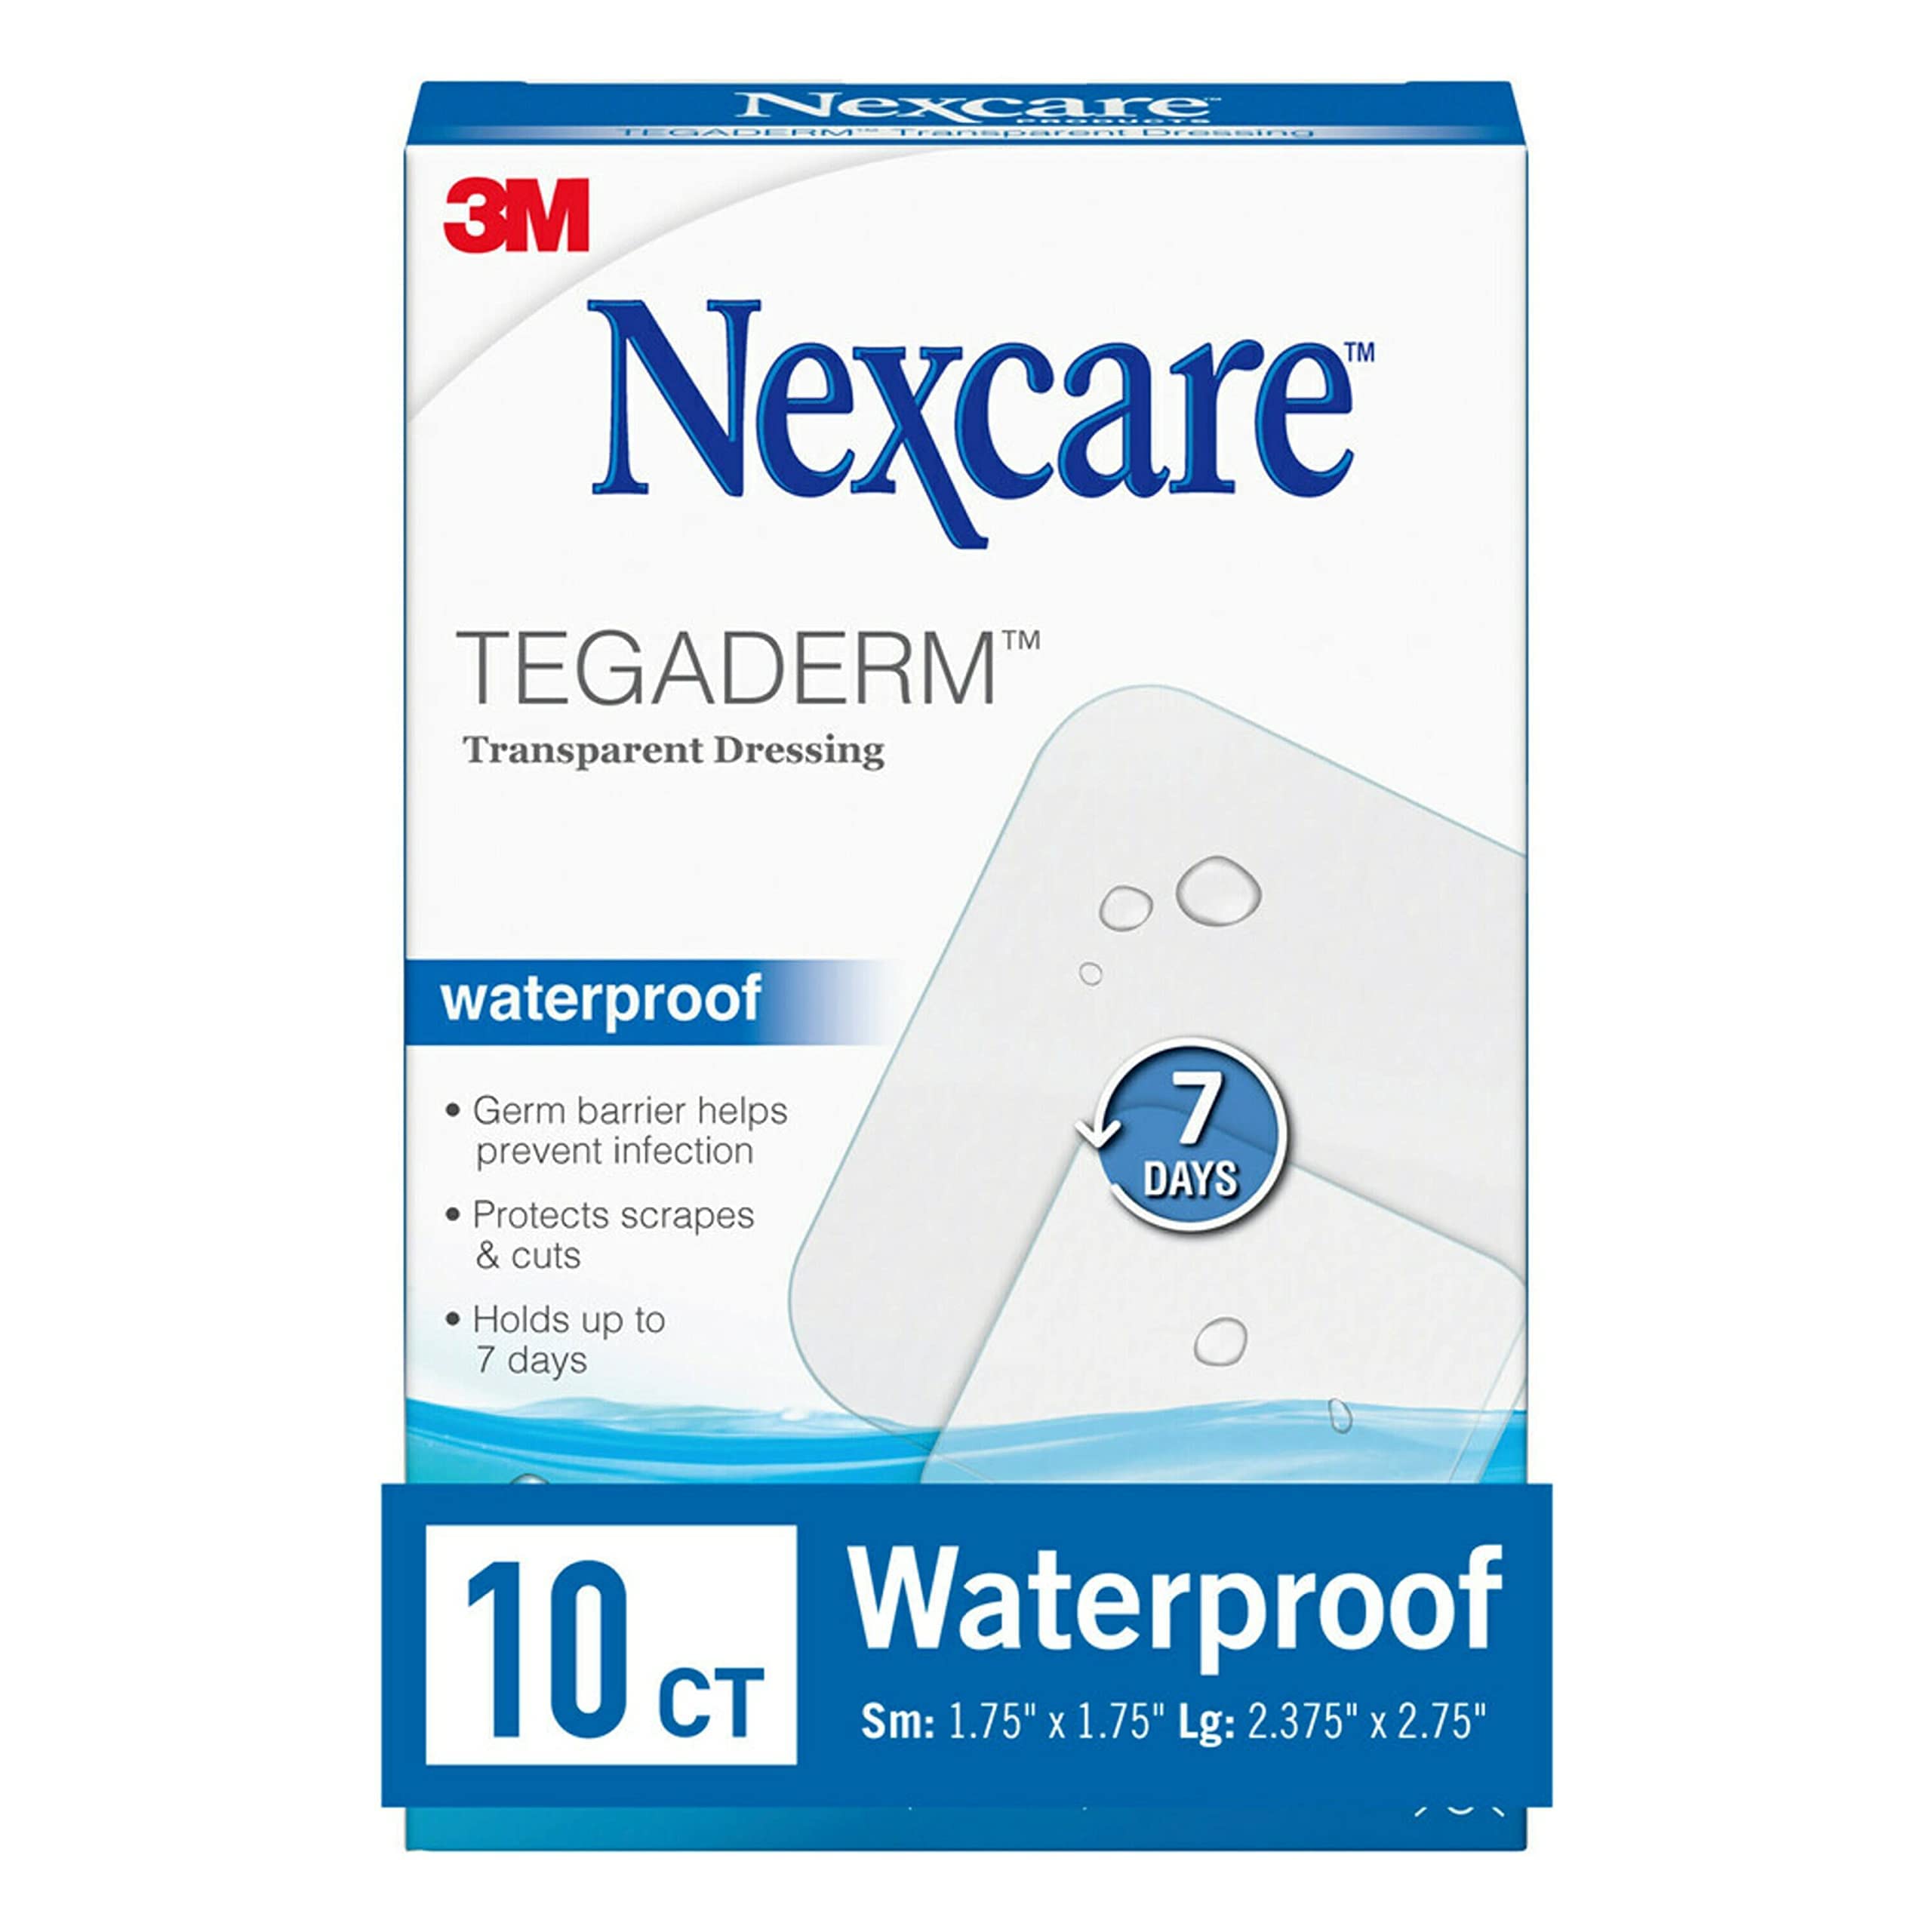 Nexcare Tegaderm Waterproof Transparent Dressing, Provides protection to minor burns, cuts, blisters and abrasions, 10 Ct, Assorted Sizes